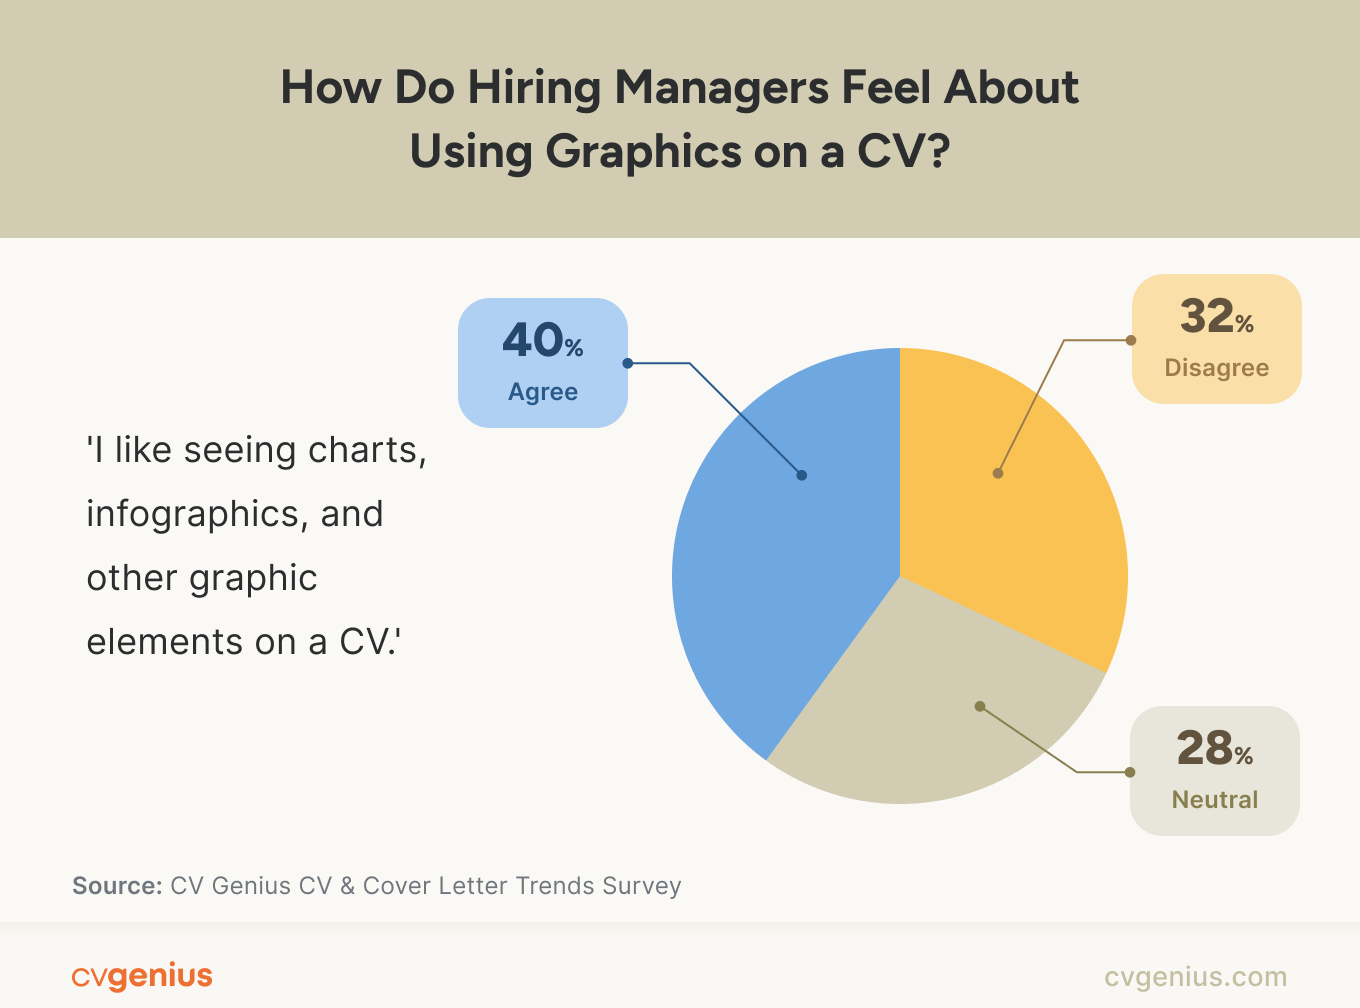 A pie chart illustrating how hiring manager feel about using graphics on a CV.